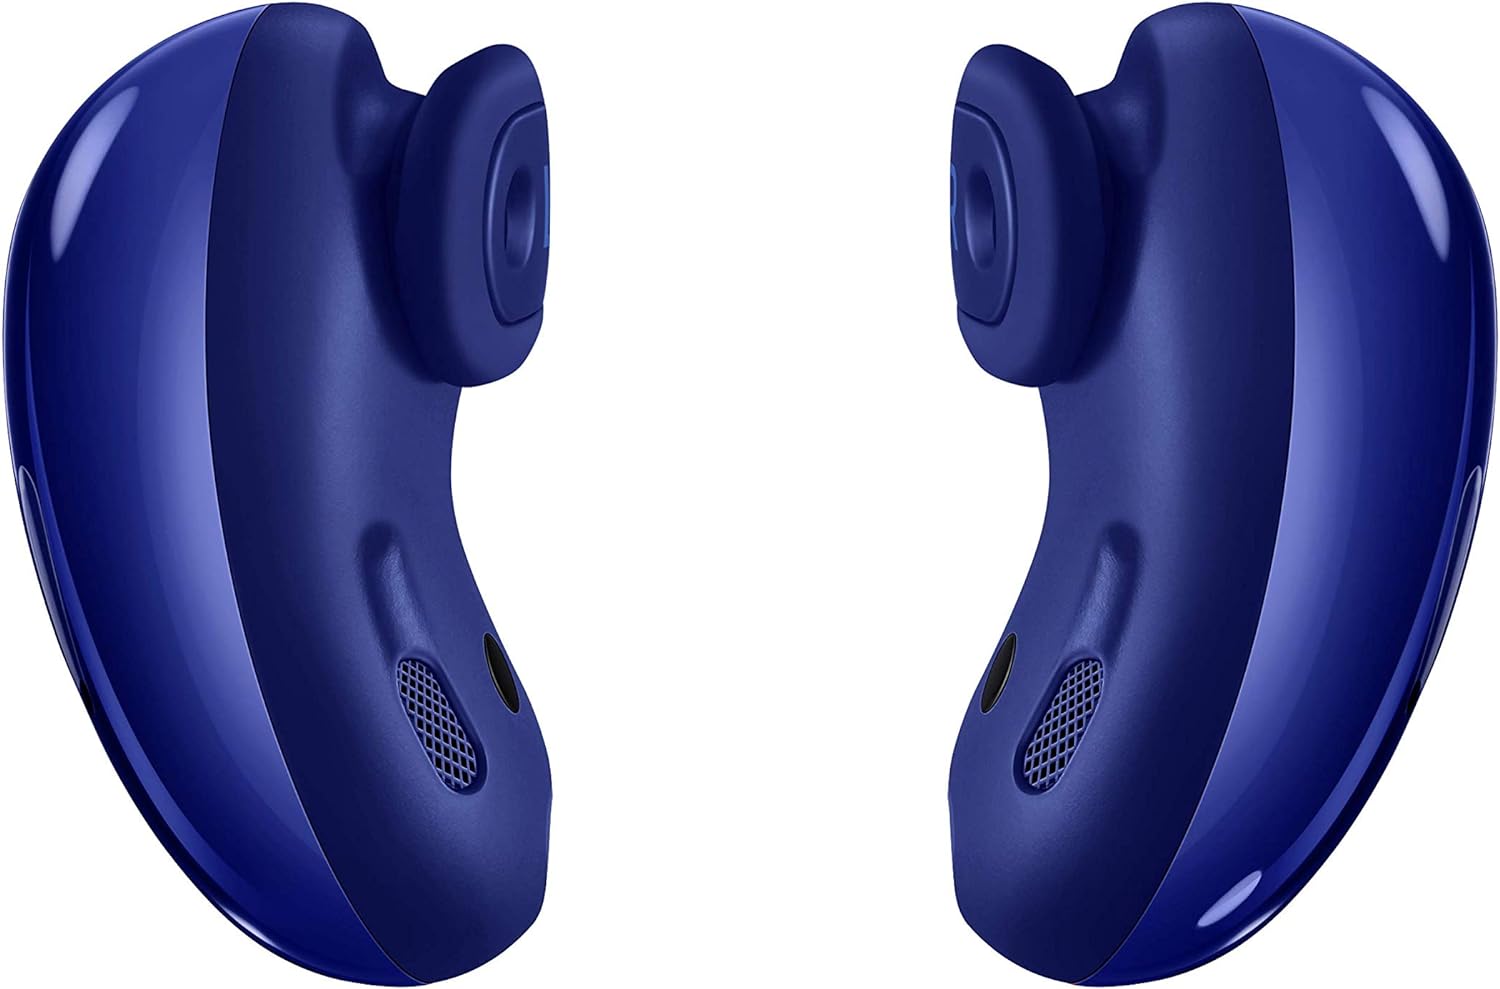 Samsung Galaxy Buds Live - Rich 12mm Speakers for Spacious Sound and Deep Bass 8806090960581